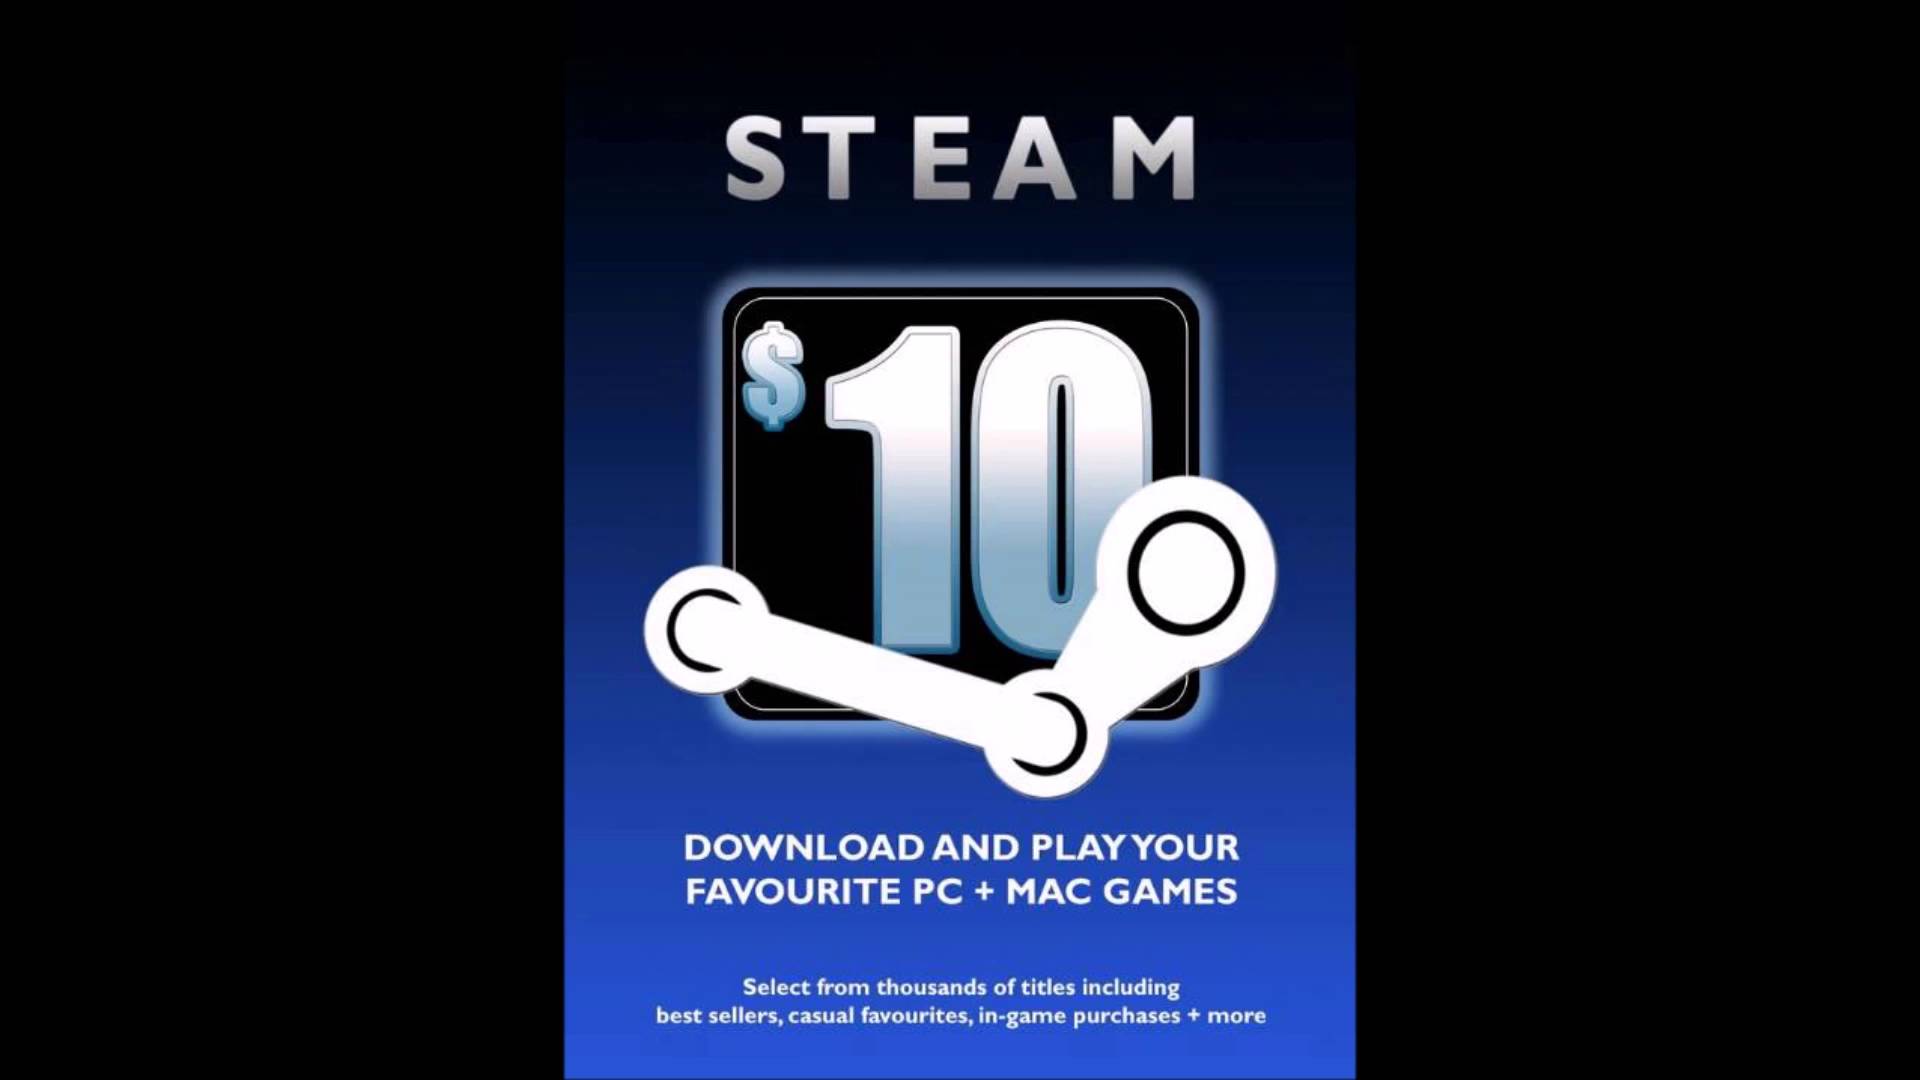 buy bitcoin with steam wallet gift card